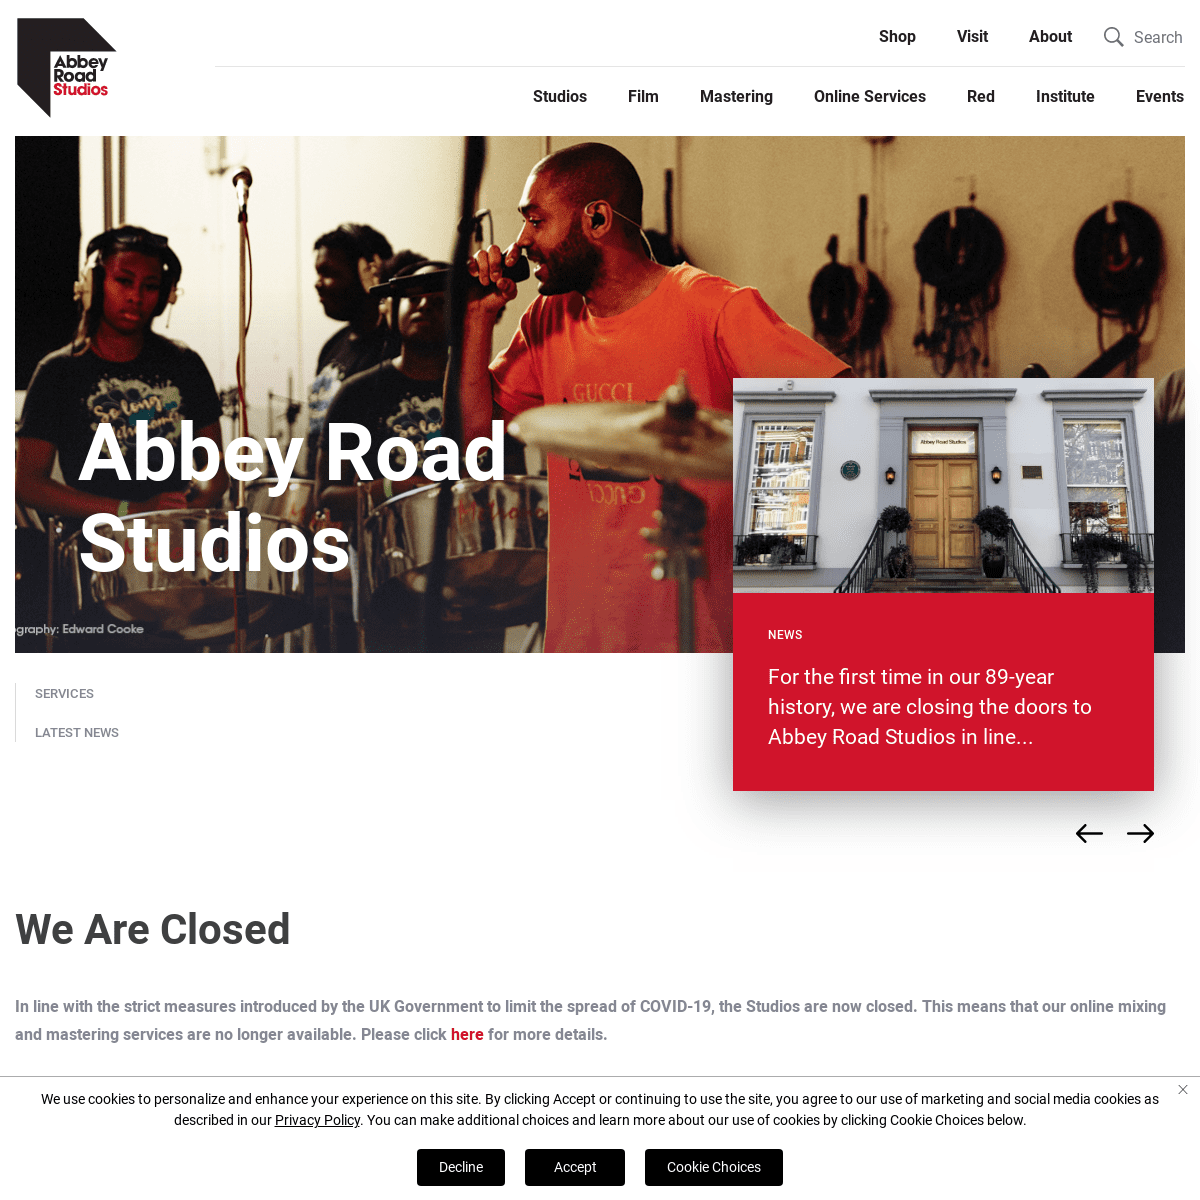 A complete backup of abbeyroad.com